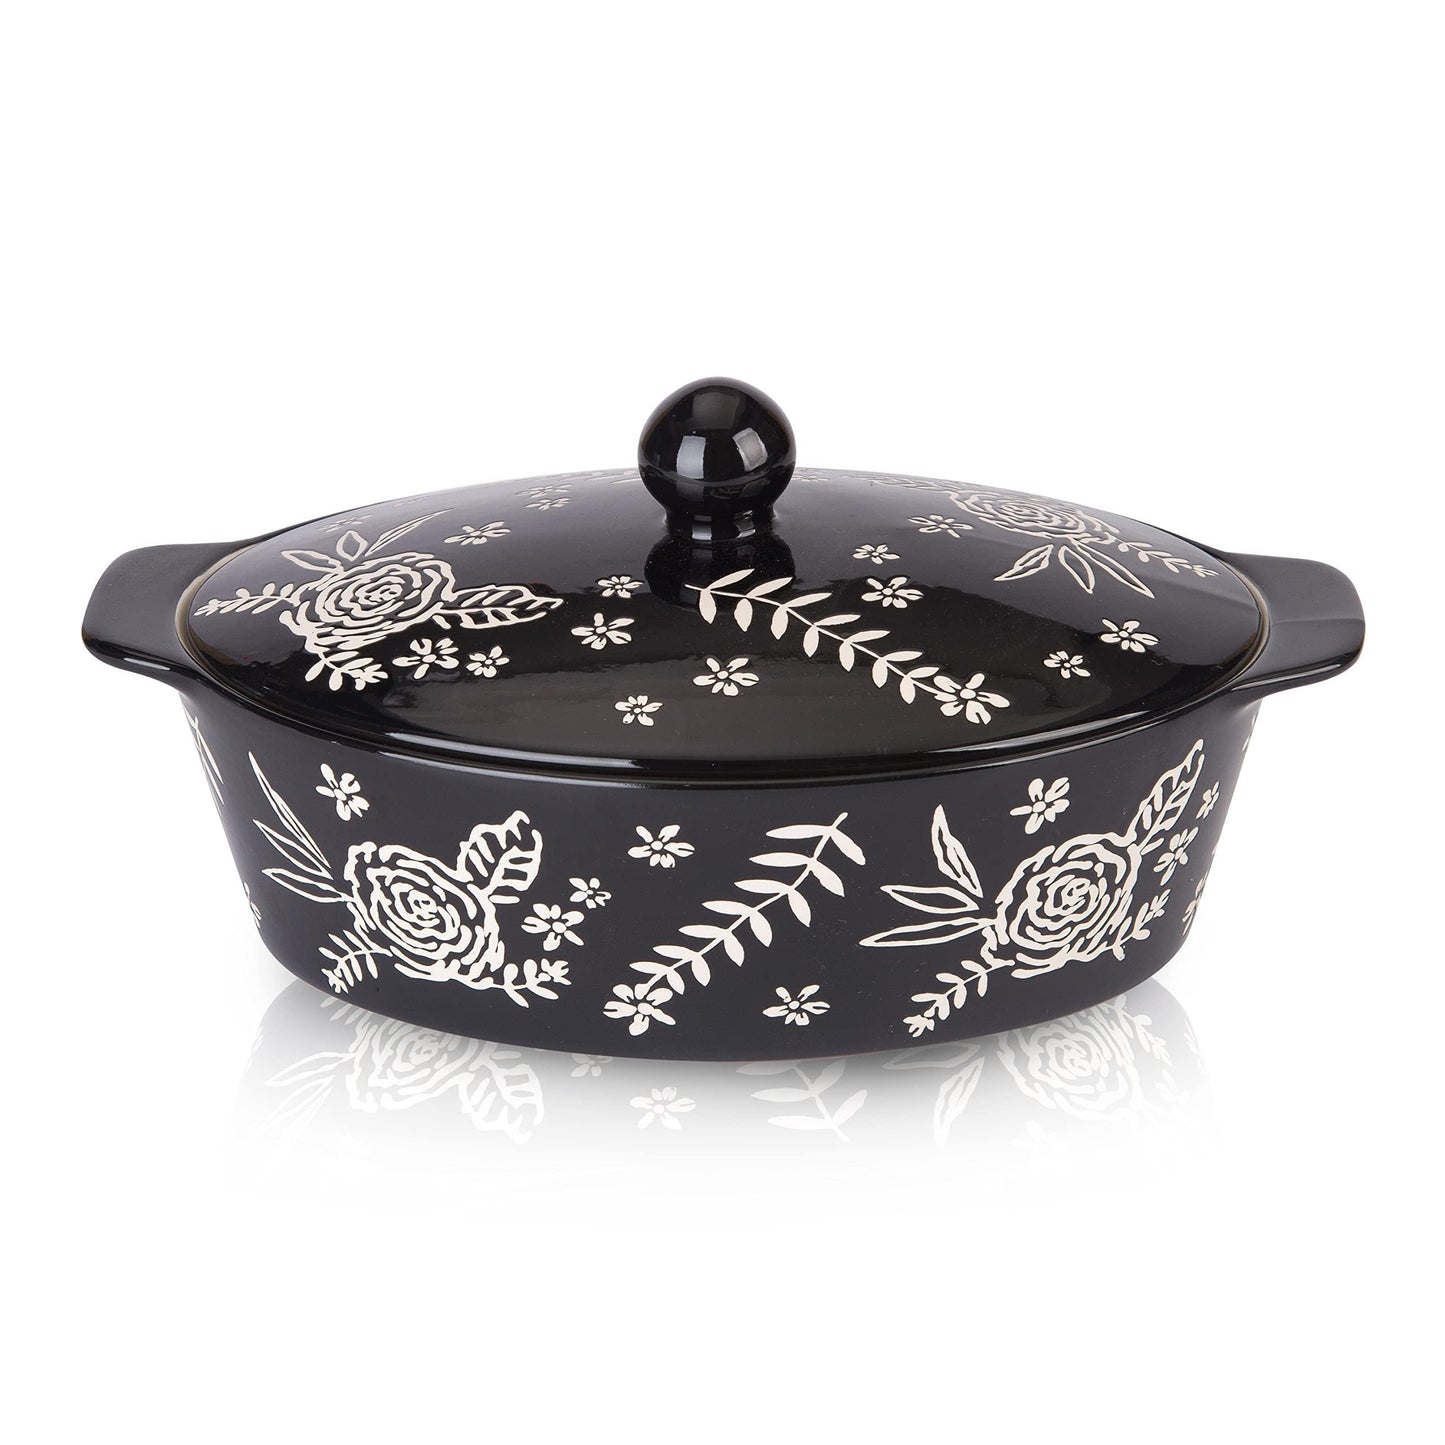 Wisenvoy Casserole Dish With Lid Casserole Dish Casserole Dishes For Oven Baking Dishes For Oven Ceramic Baking Dish - CookCave